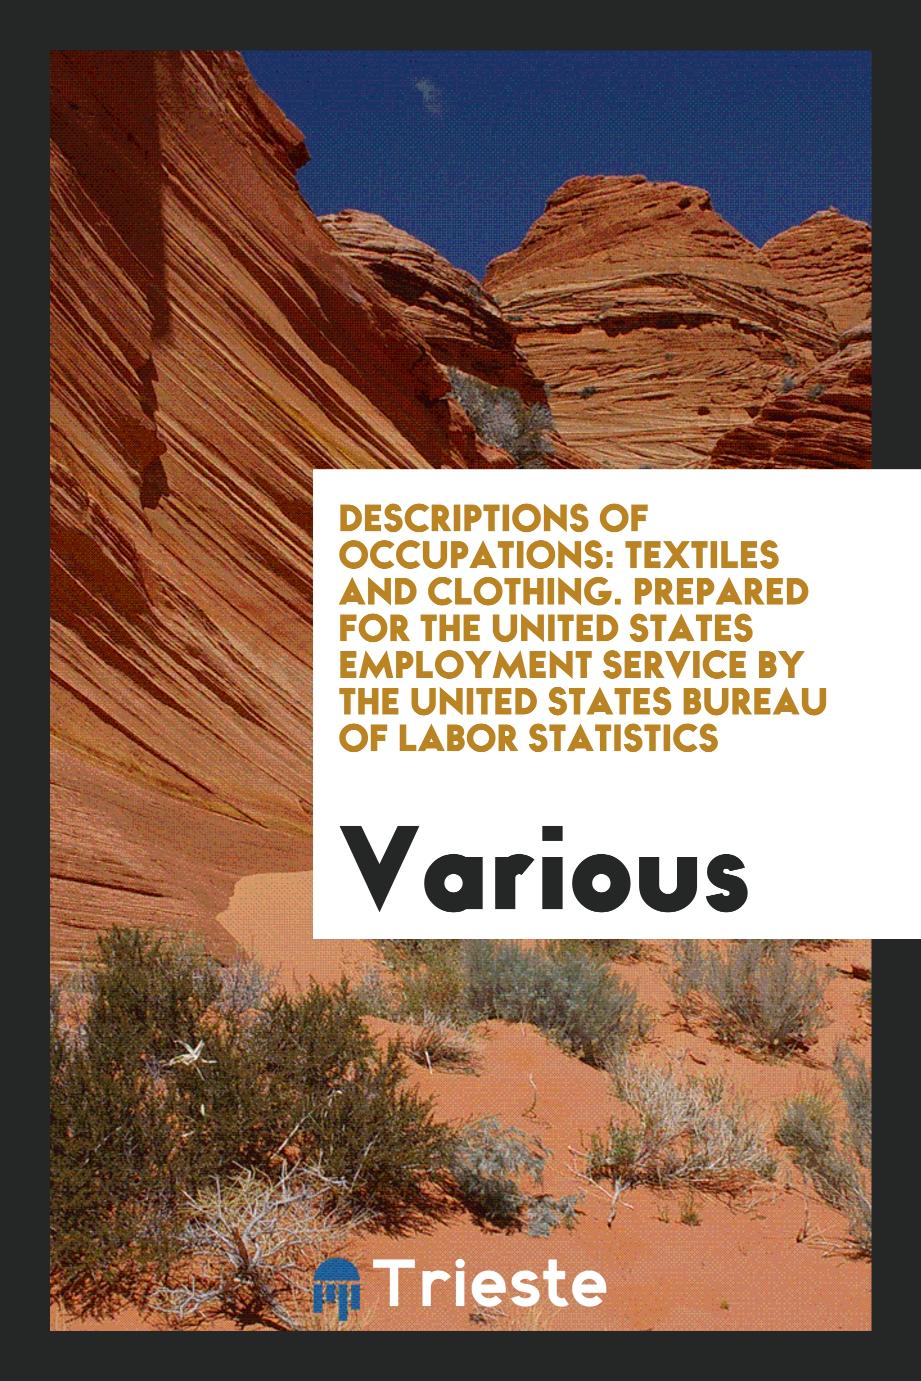 Descriptions of Occupations: Textiles and Clothing. Prepared for the United States Employment Service by the United States Bureau of Labor Statistics